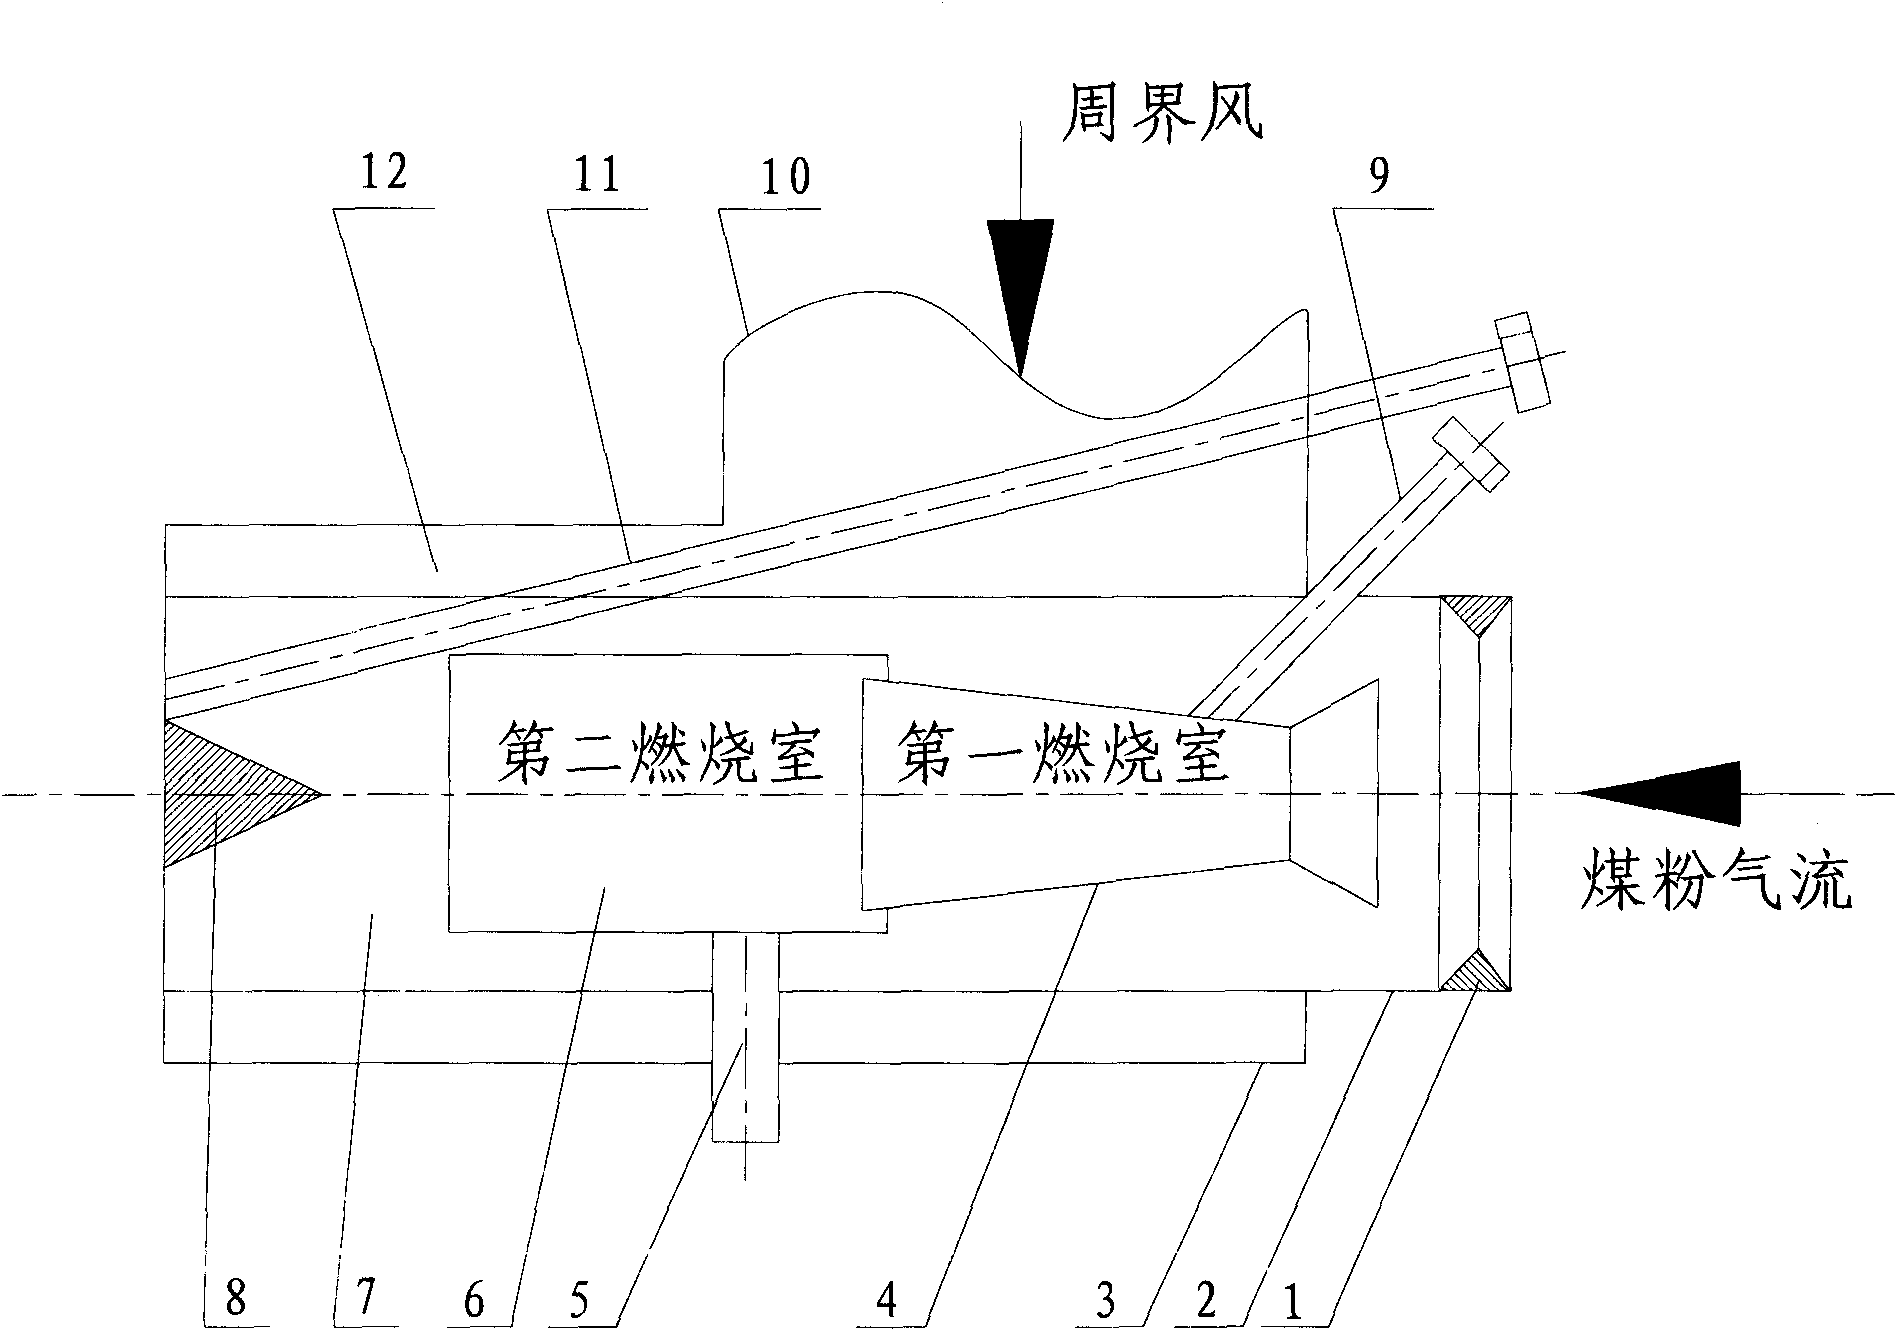 Oil-saving ignition method for fault coal and pulverized coal burner applying method